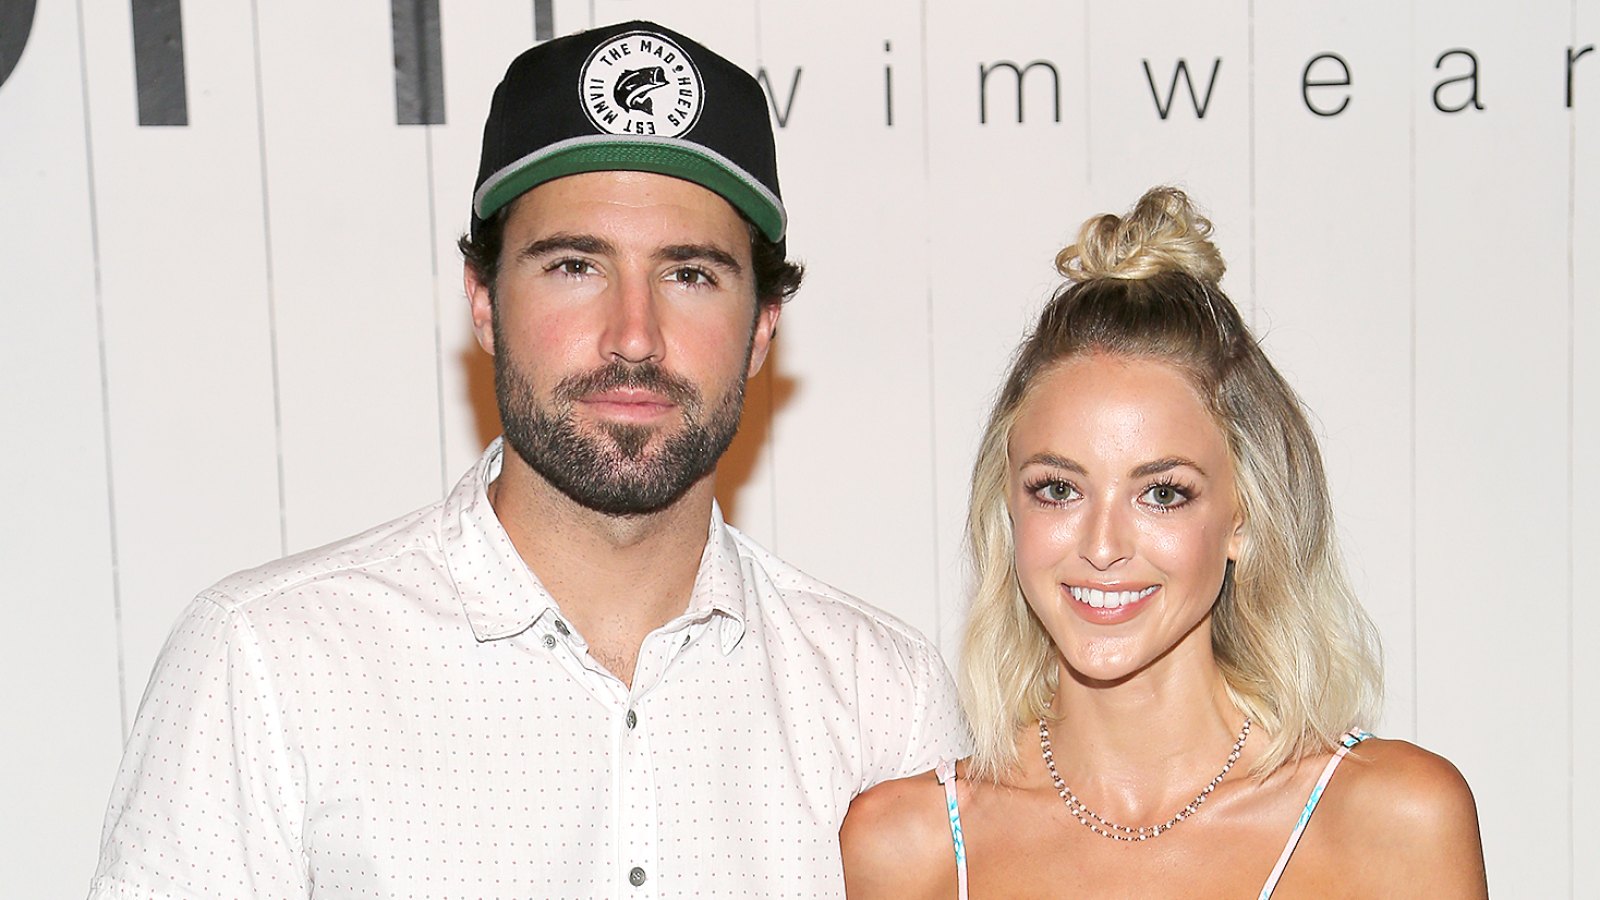 Brody Jenner and Kaitlynn Carter attend the Tori Praver fashion show during FUNKSHION: Fashion Week Miami Beach Swim at the FUNKSHION Tent on July 18, 2015 in Miami Beach, Florida.